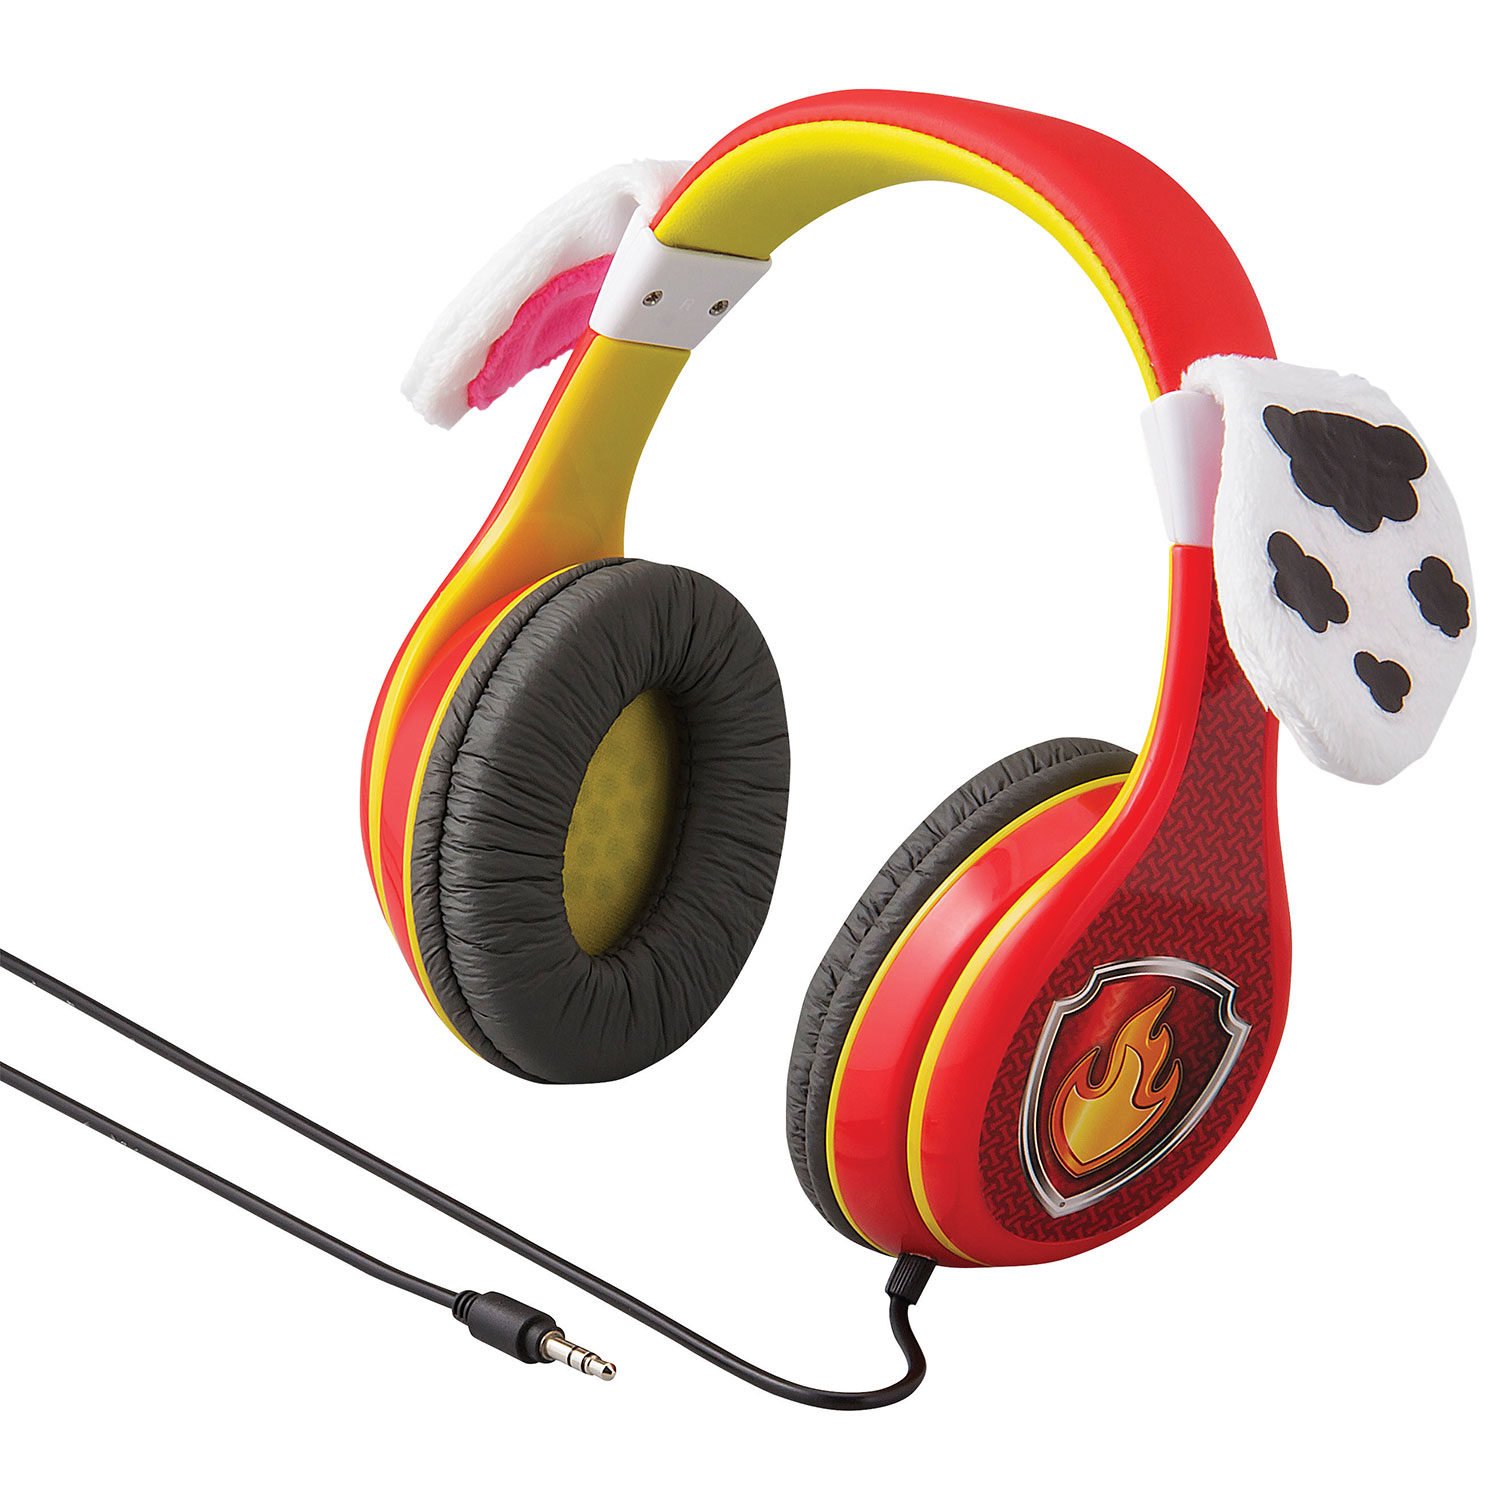 KIDdesigns Paw Patrol Over-Ear Noise Cancelling Kids Headphones - Red/Yellow